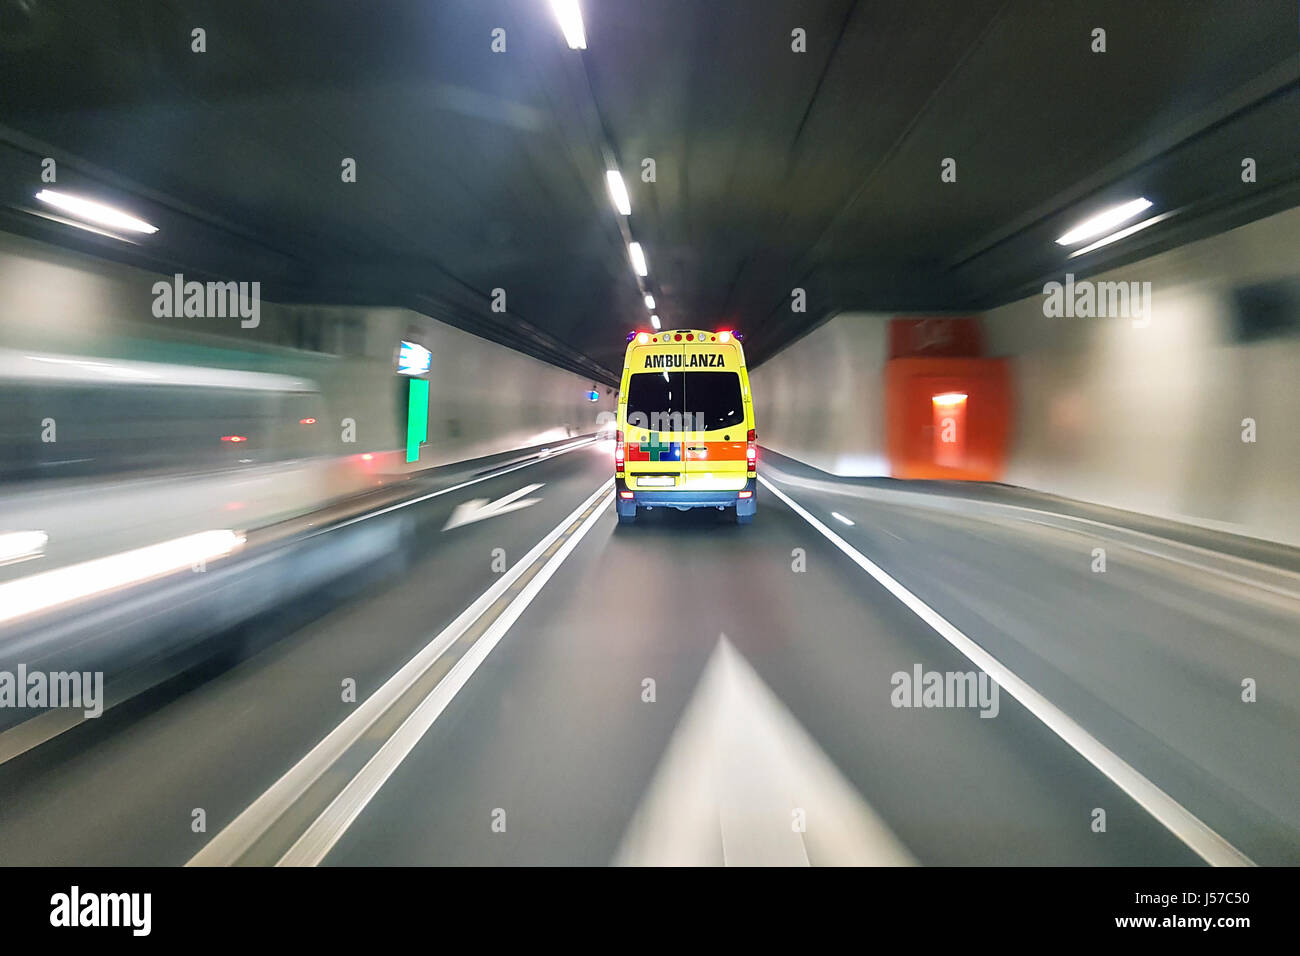 Ambulance speeding in road tunnel with traffic motion blur background Stock Photo